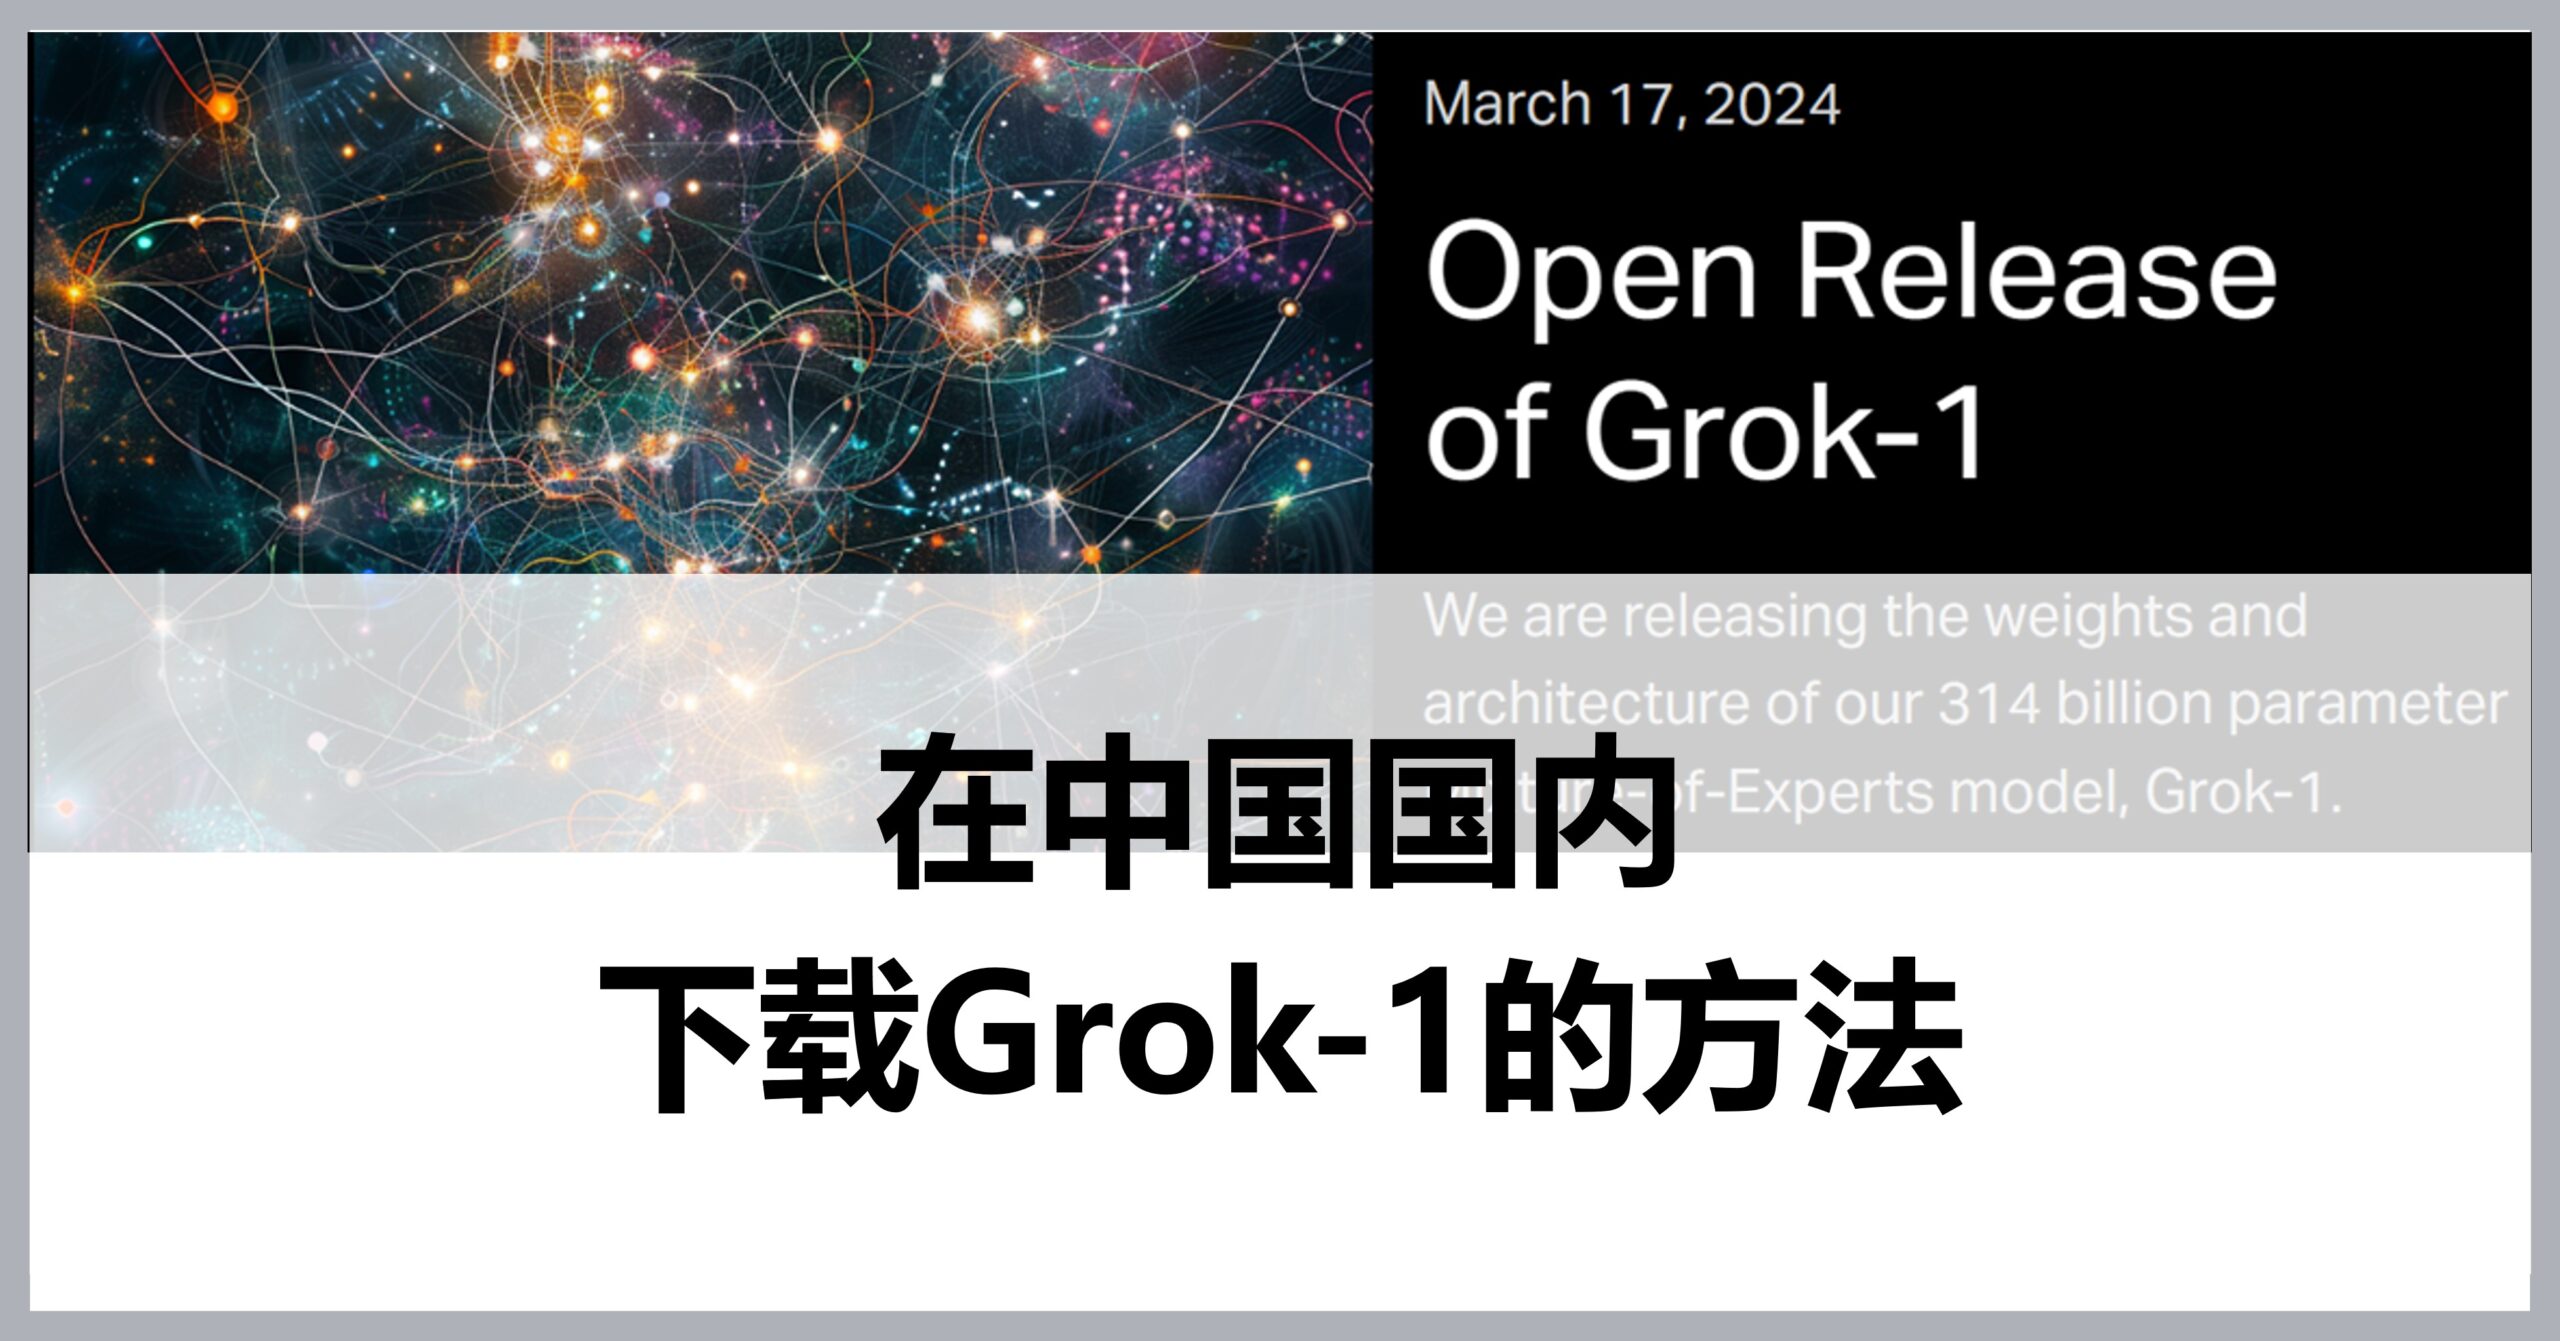 How to access Grok-1 in China